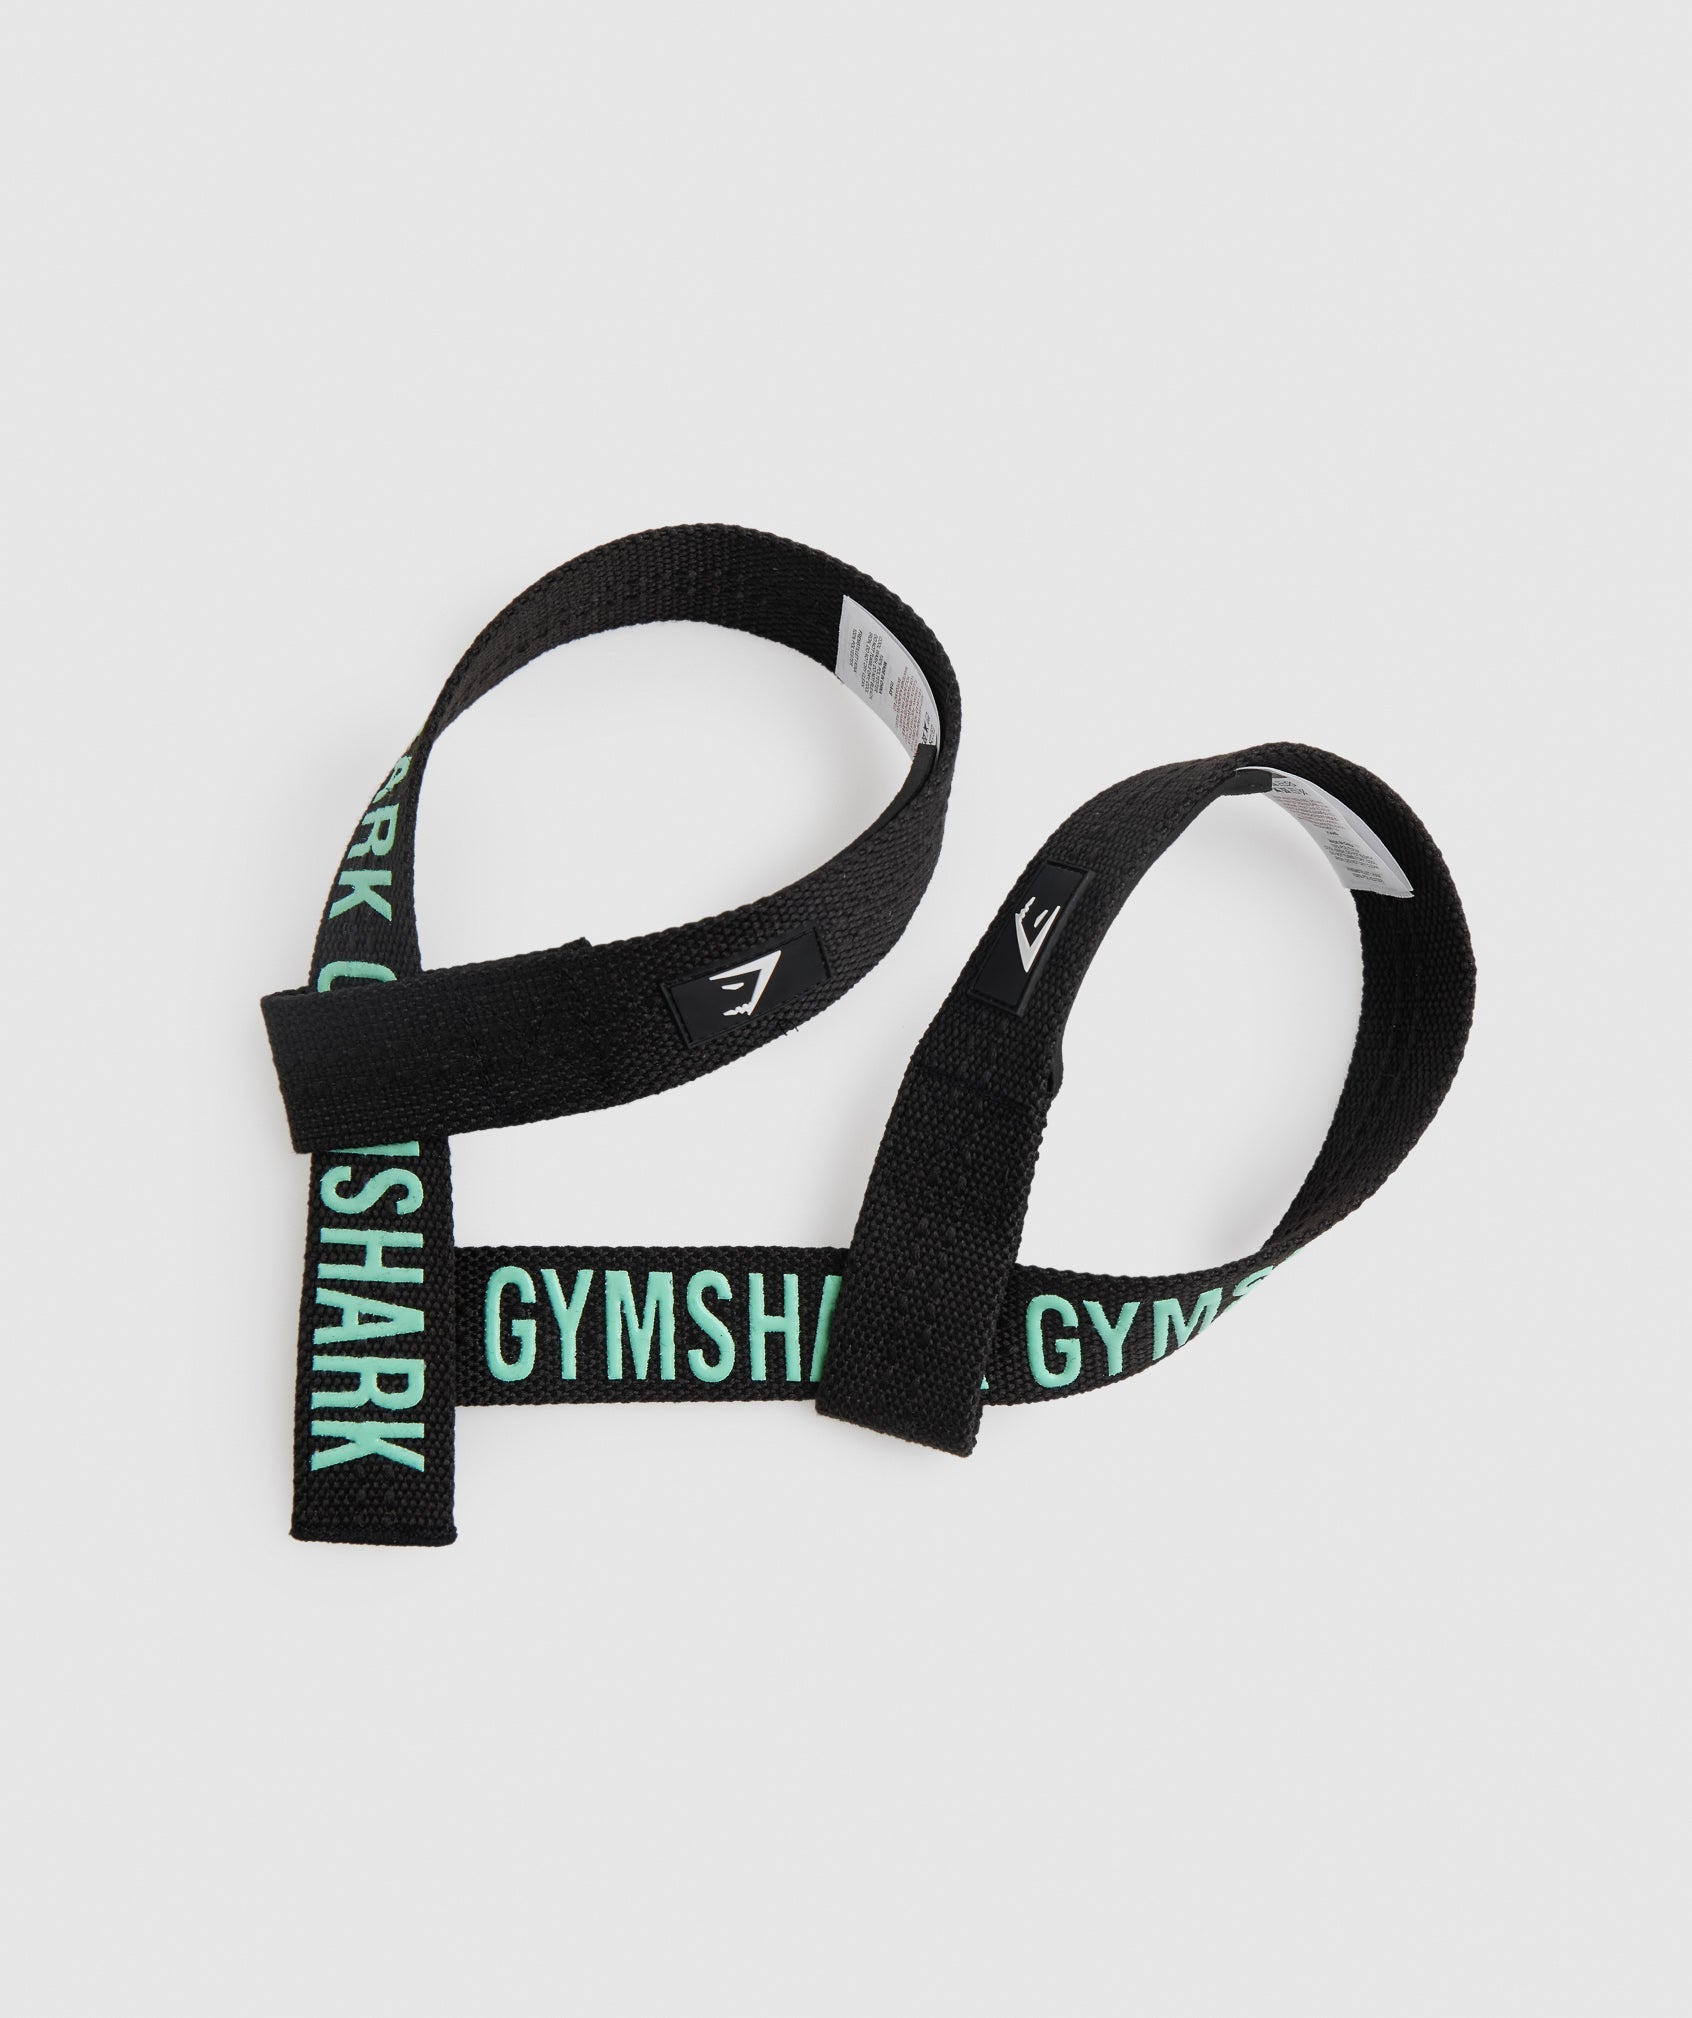 Gymshark Silicone Lifting Straps - Black/Blue – Client 446 100K